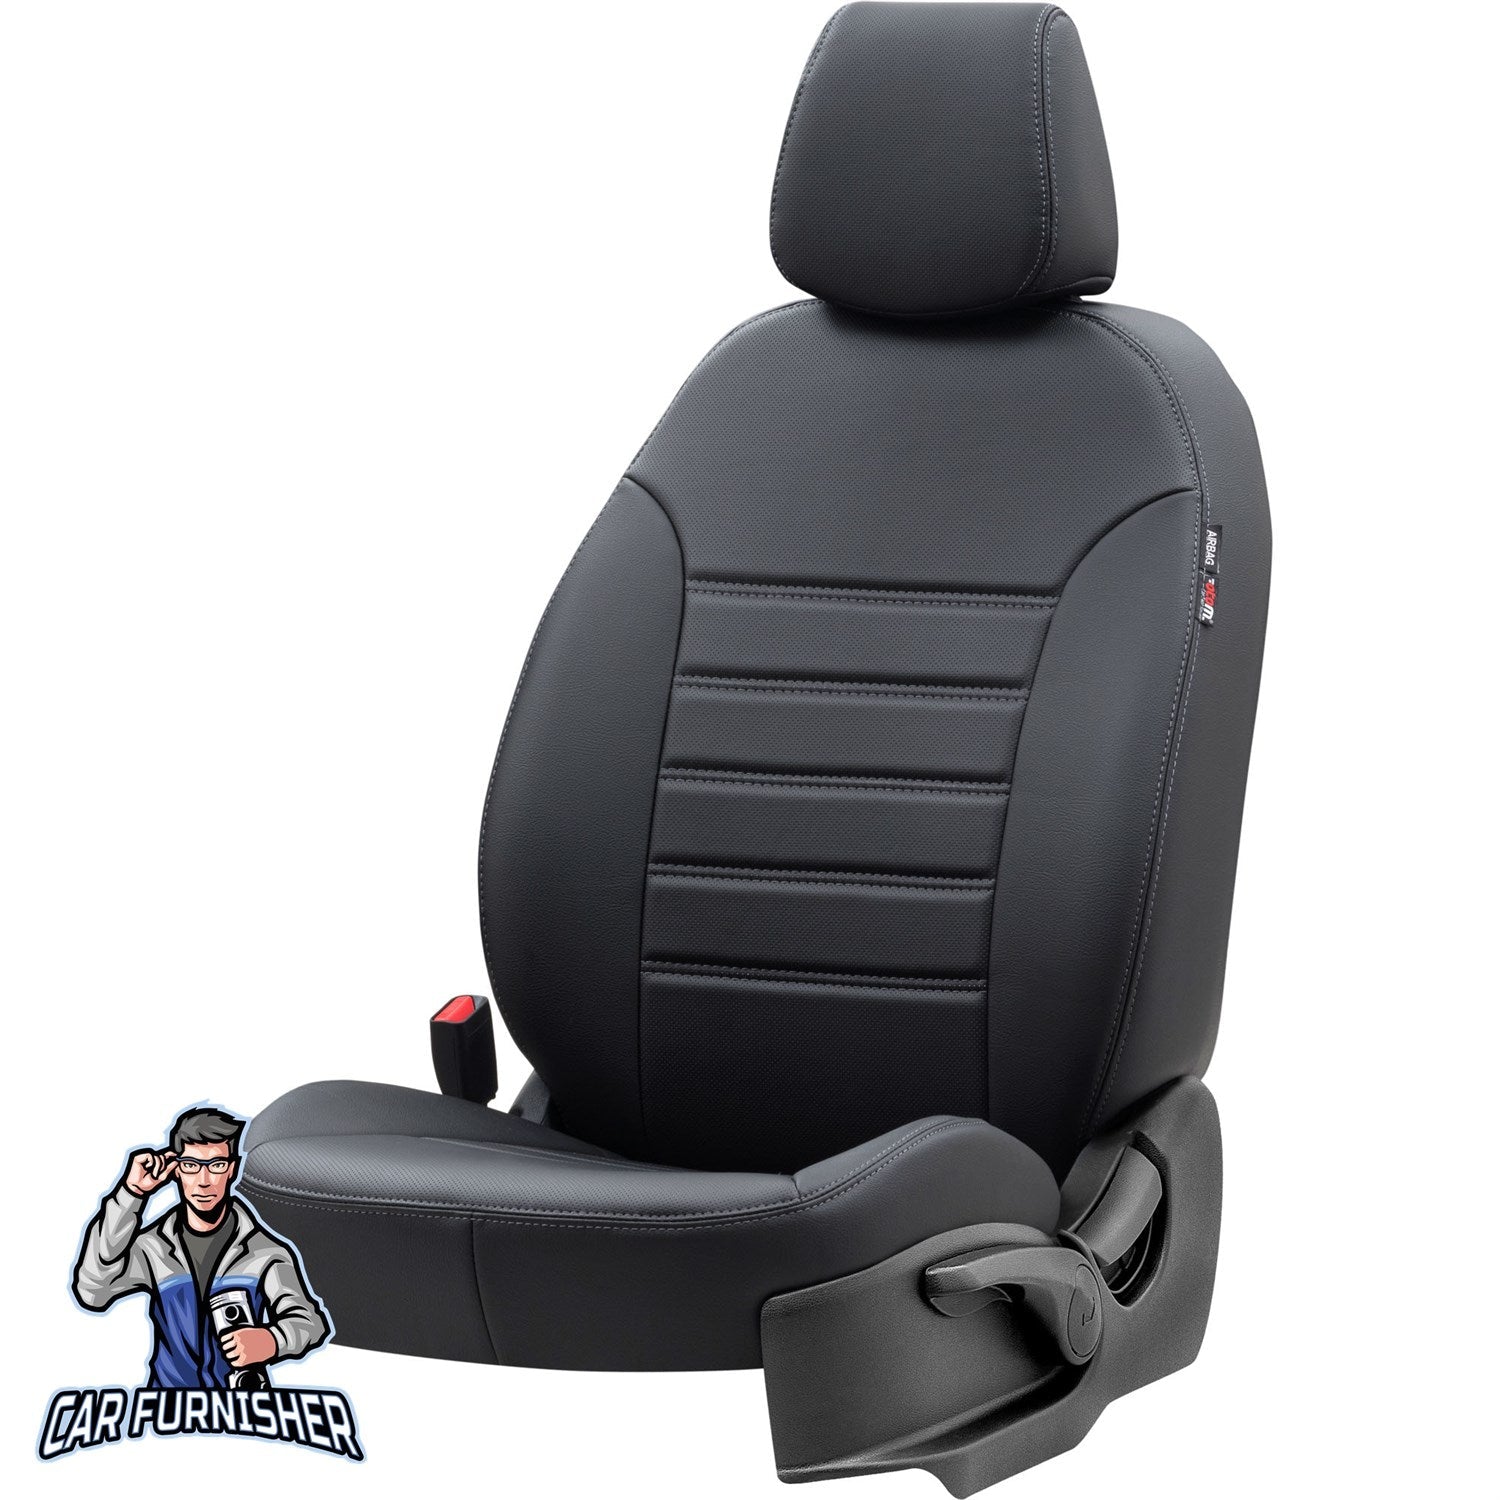 Nissan Pulsar Seat Covers Istanbul Leather Design Black Leather